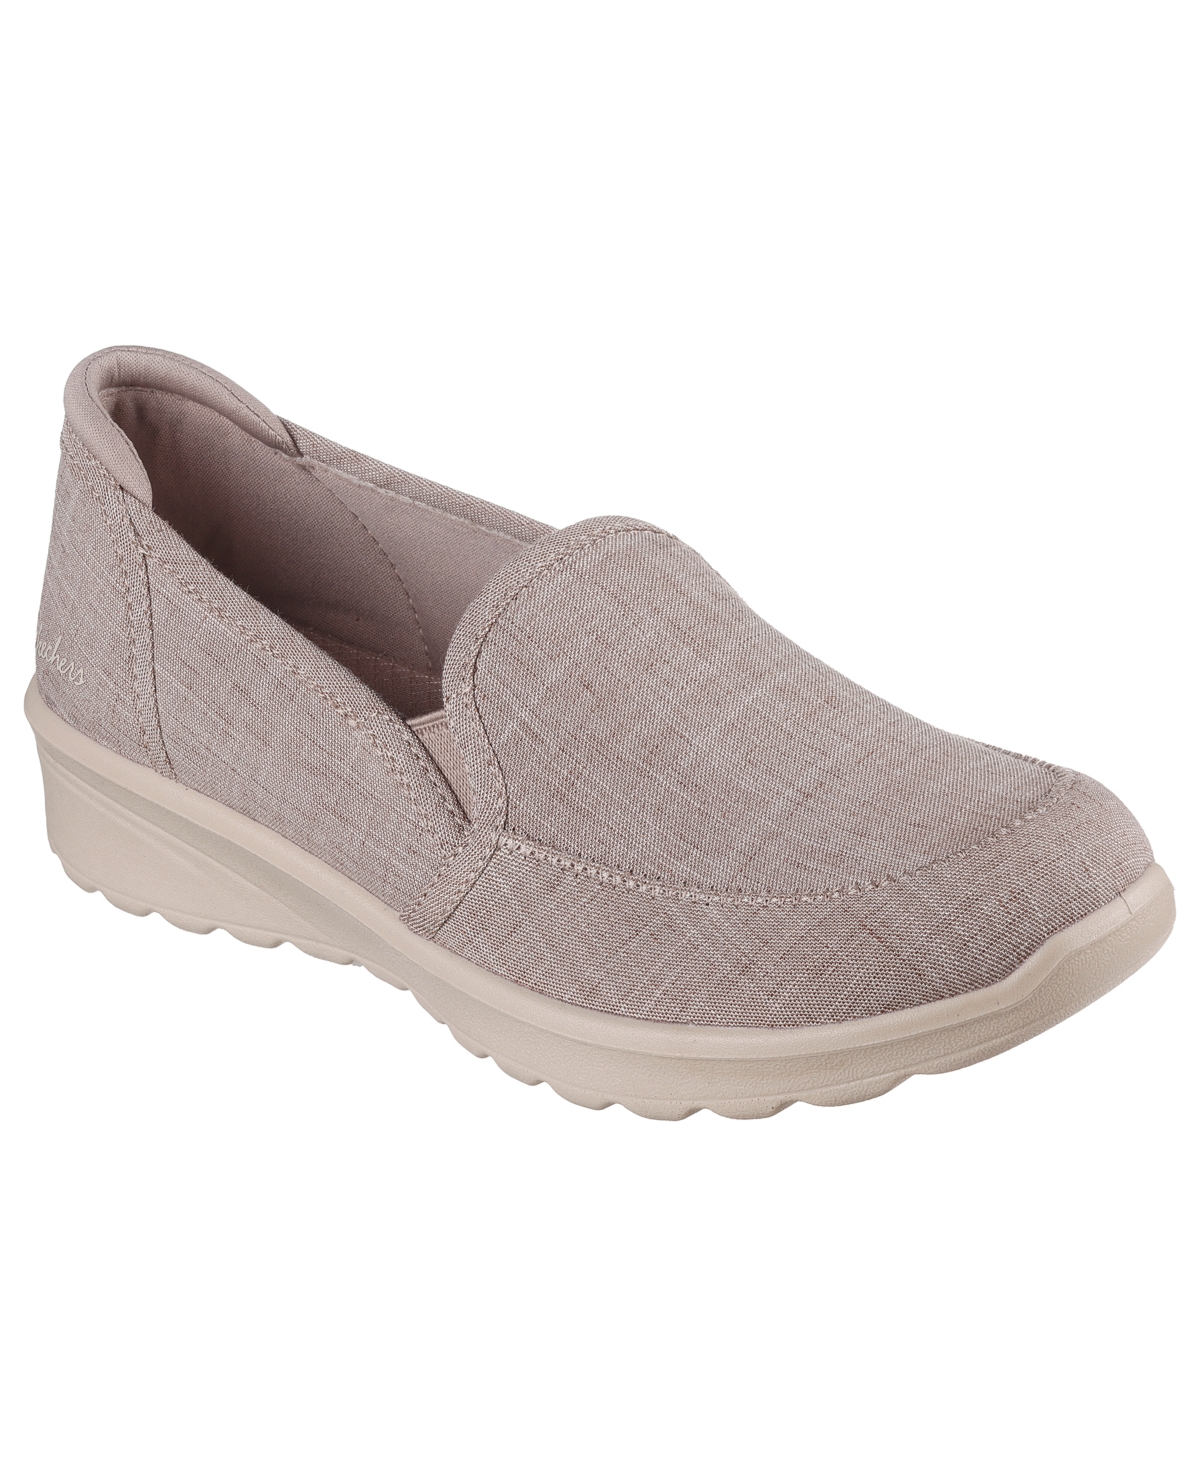 Women's Lovely Vibe Slip-On Casual Sneakers from Finish Line - Tpe-taupe